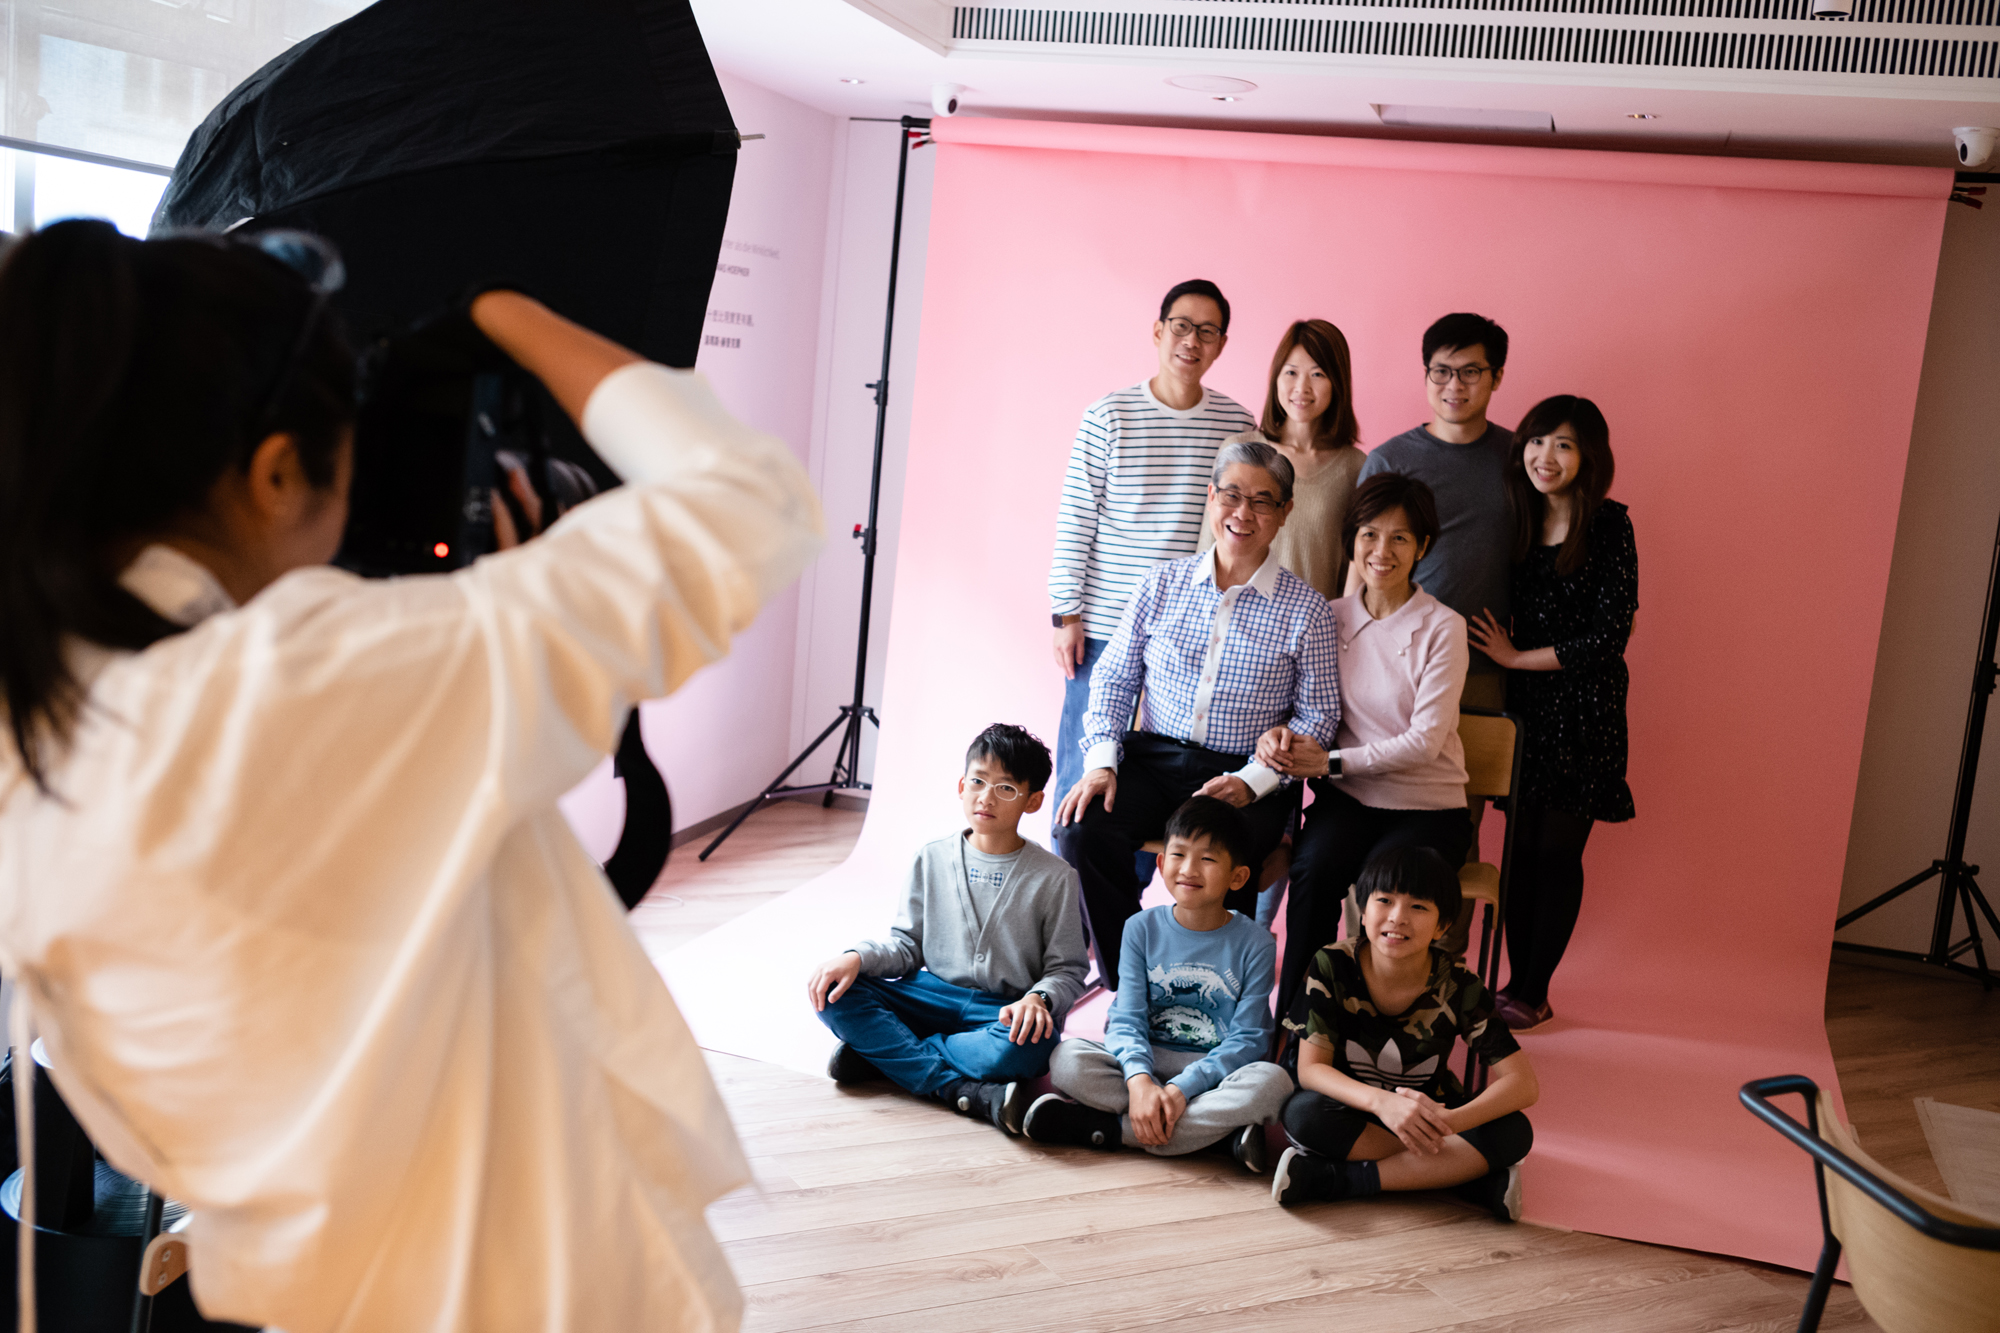 Studio portraits set up | Behind-the-scenes of photographer Tracy Wong